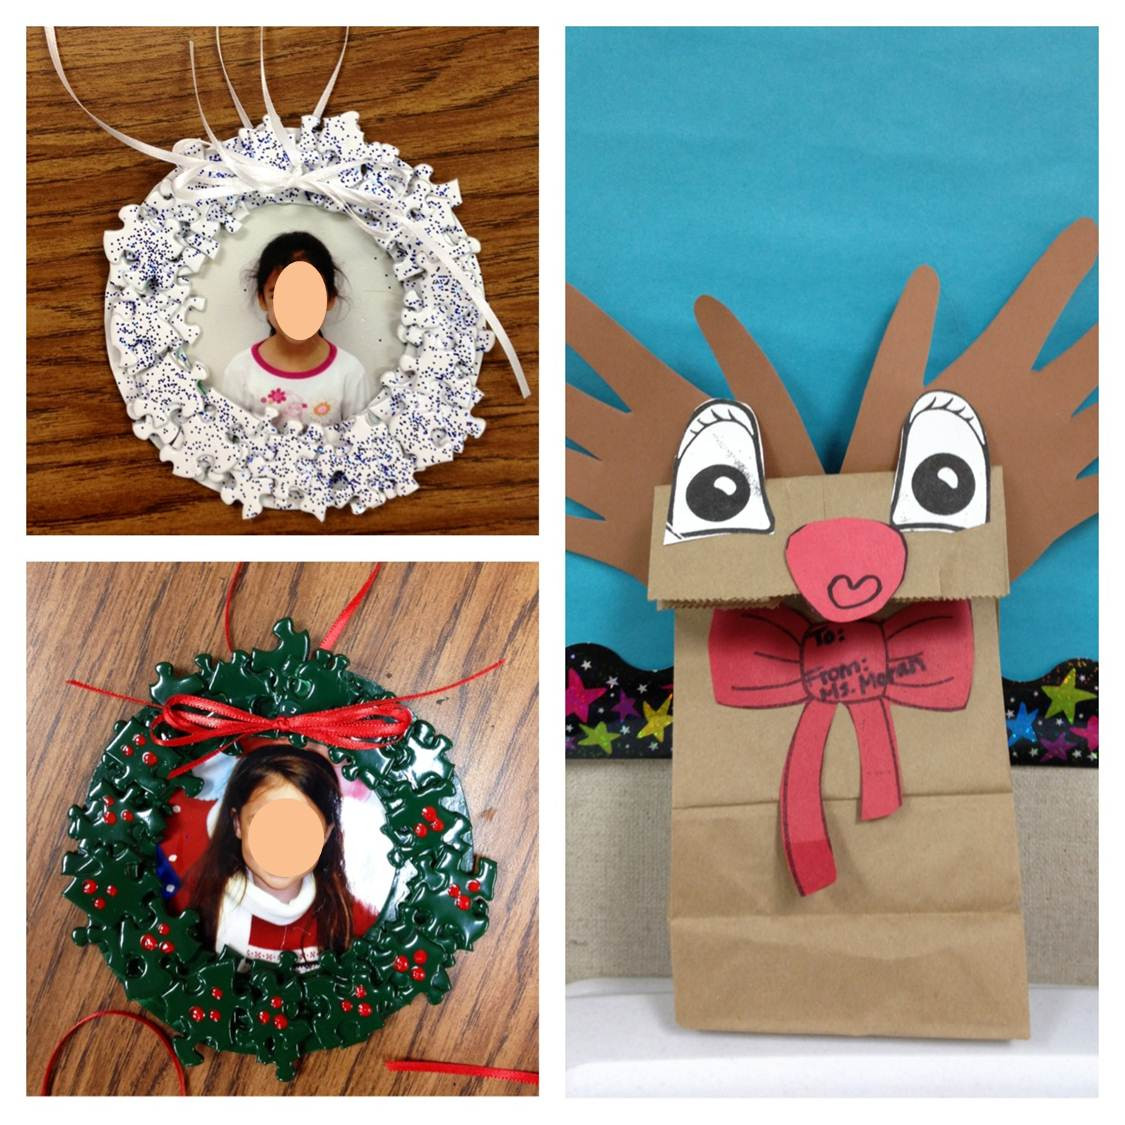 Christmas Gift Ideas For Parents
 Susan Jones Teaching Parent & Student Holiday Gifts